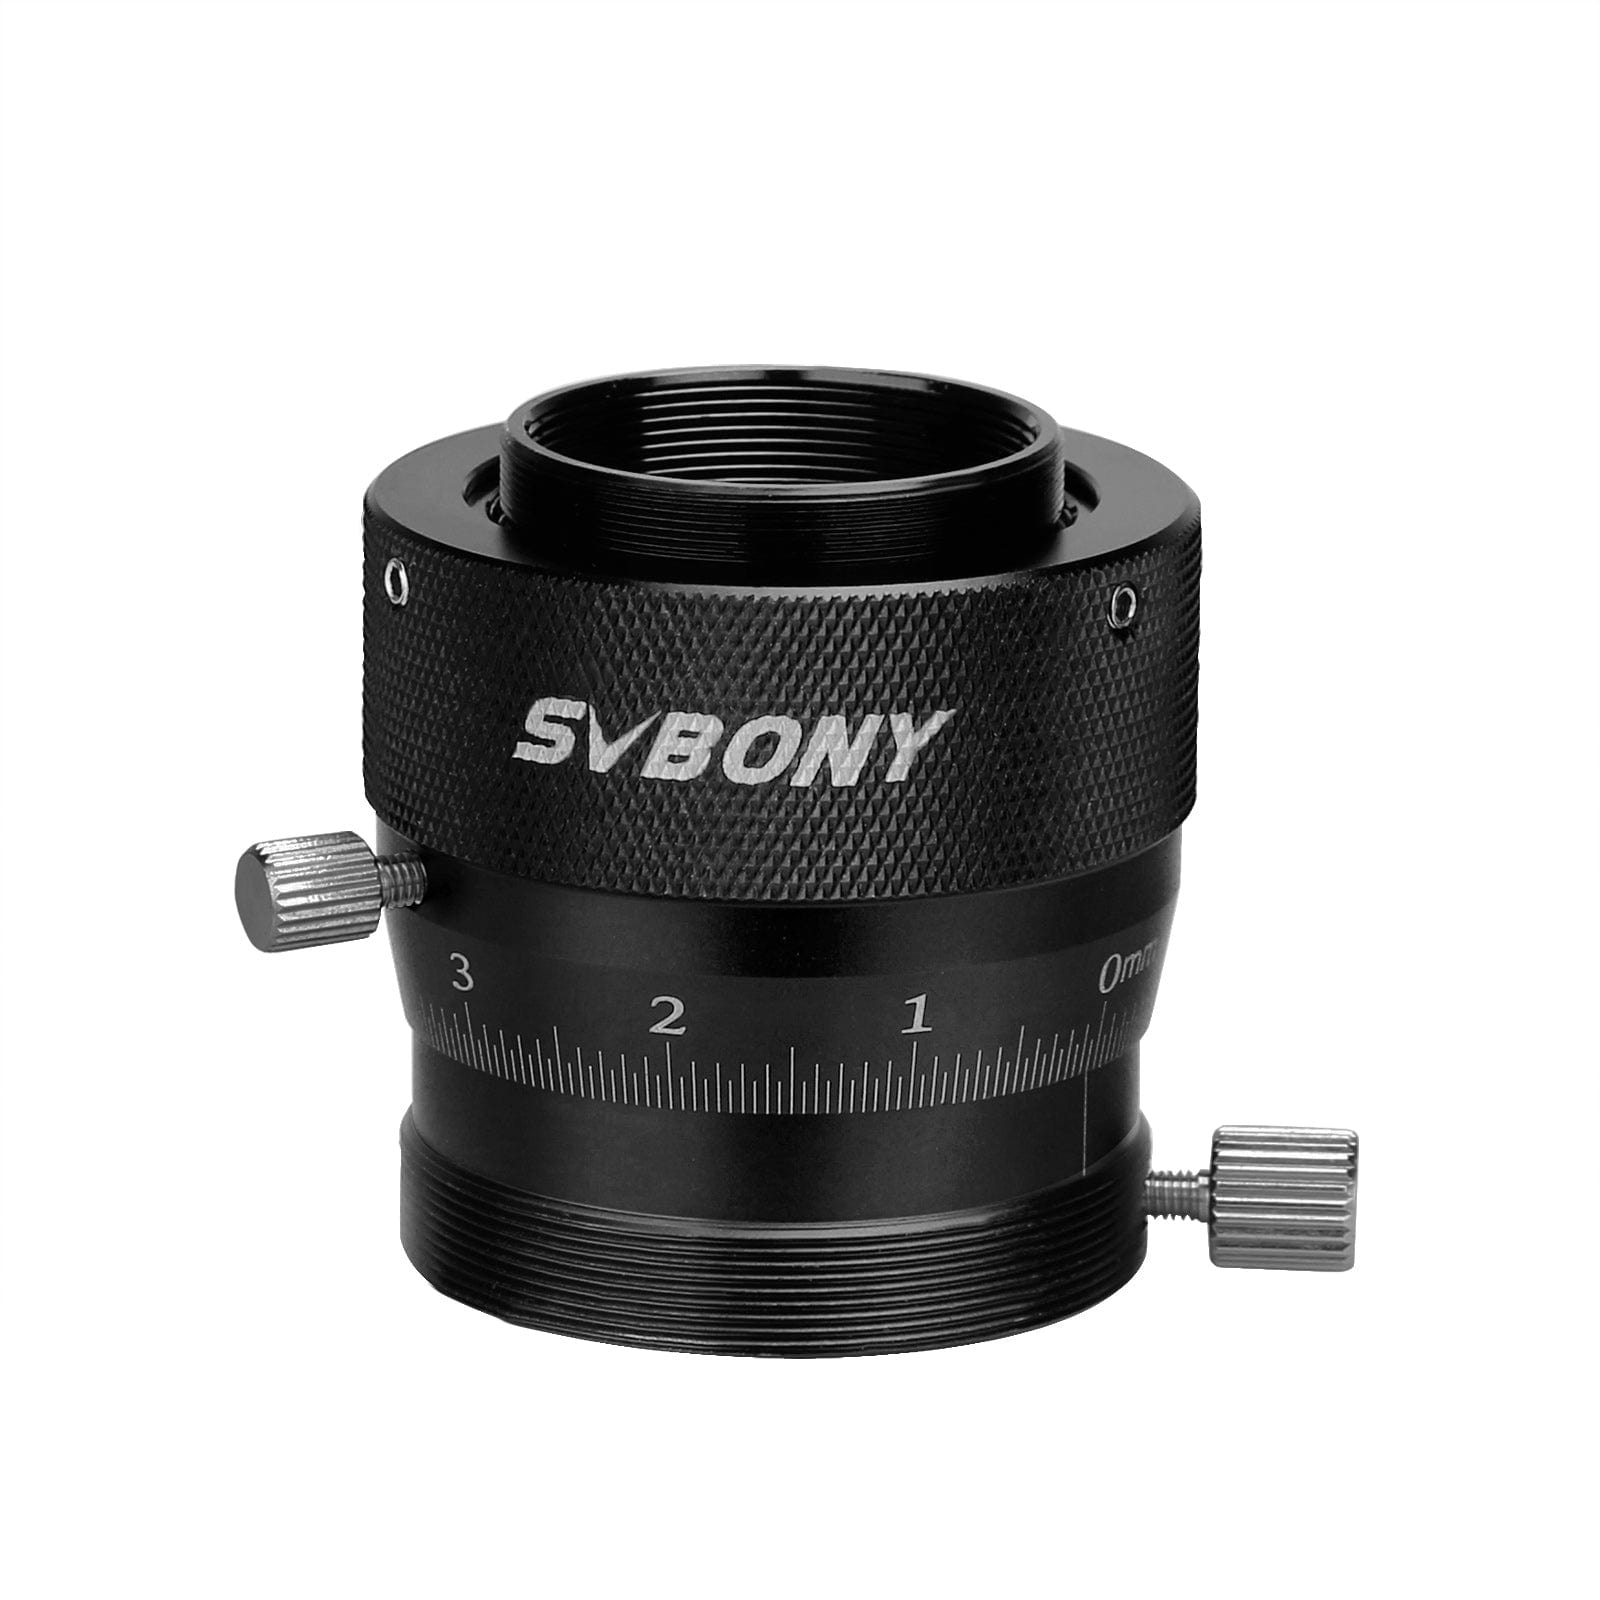 Svbony Accessory SV161 1.25'' Double Helical Focuser for Telescope - F9173A